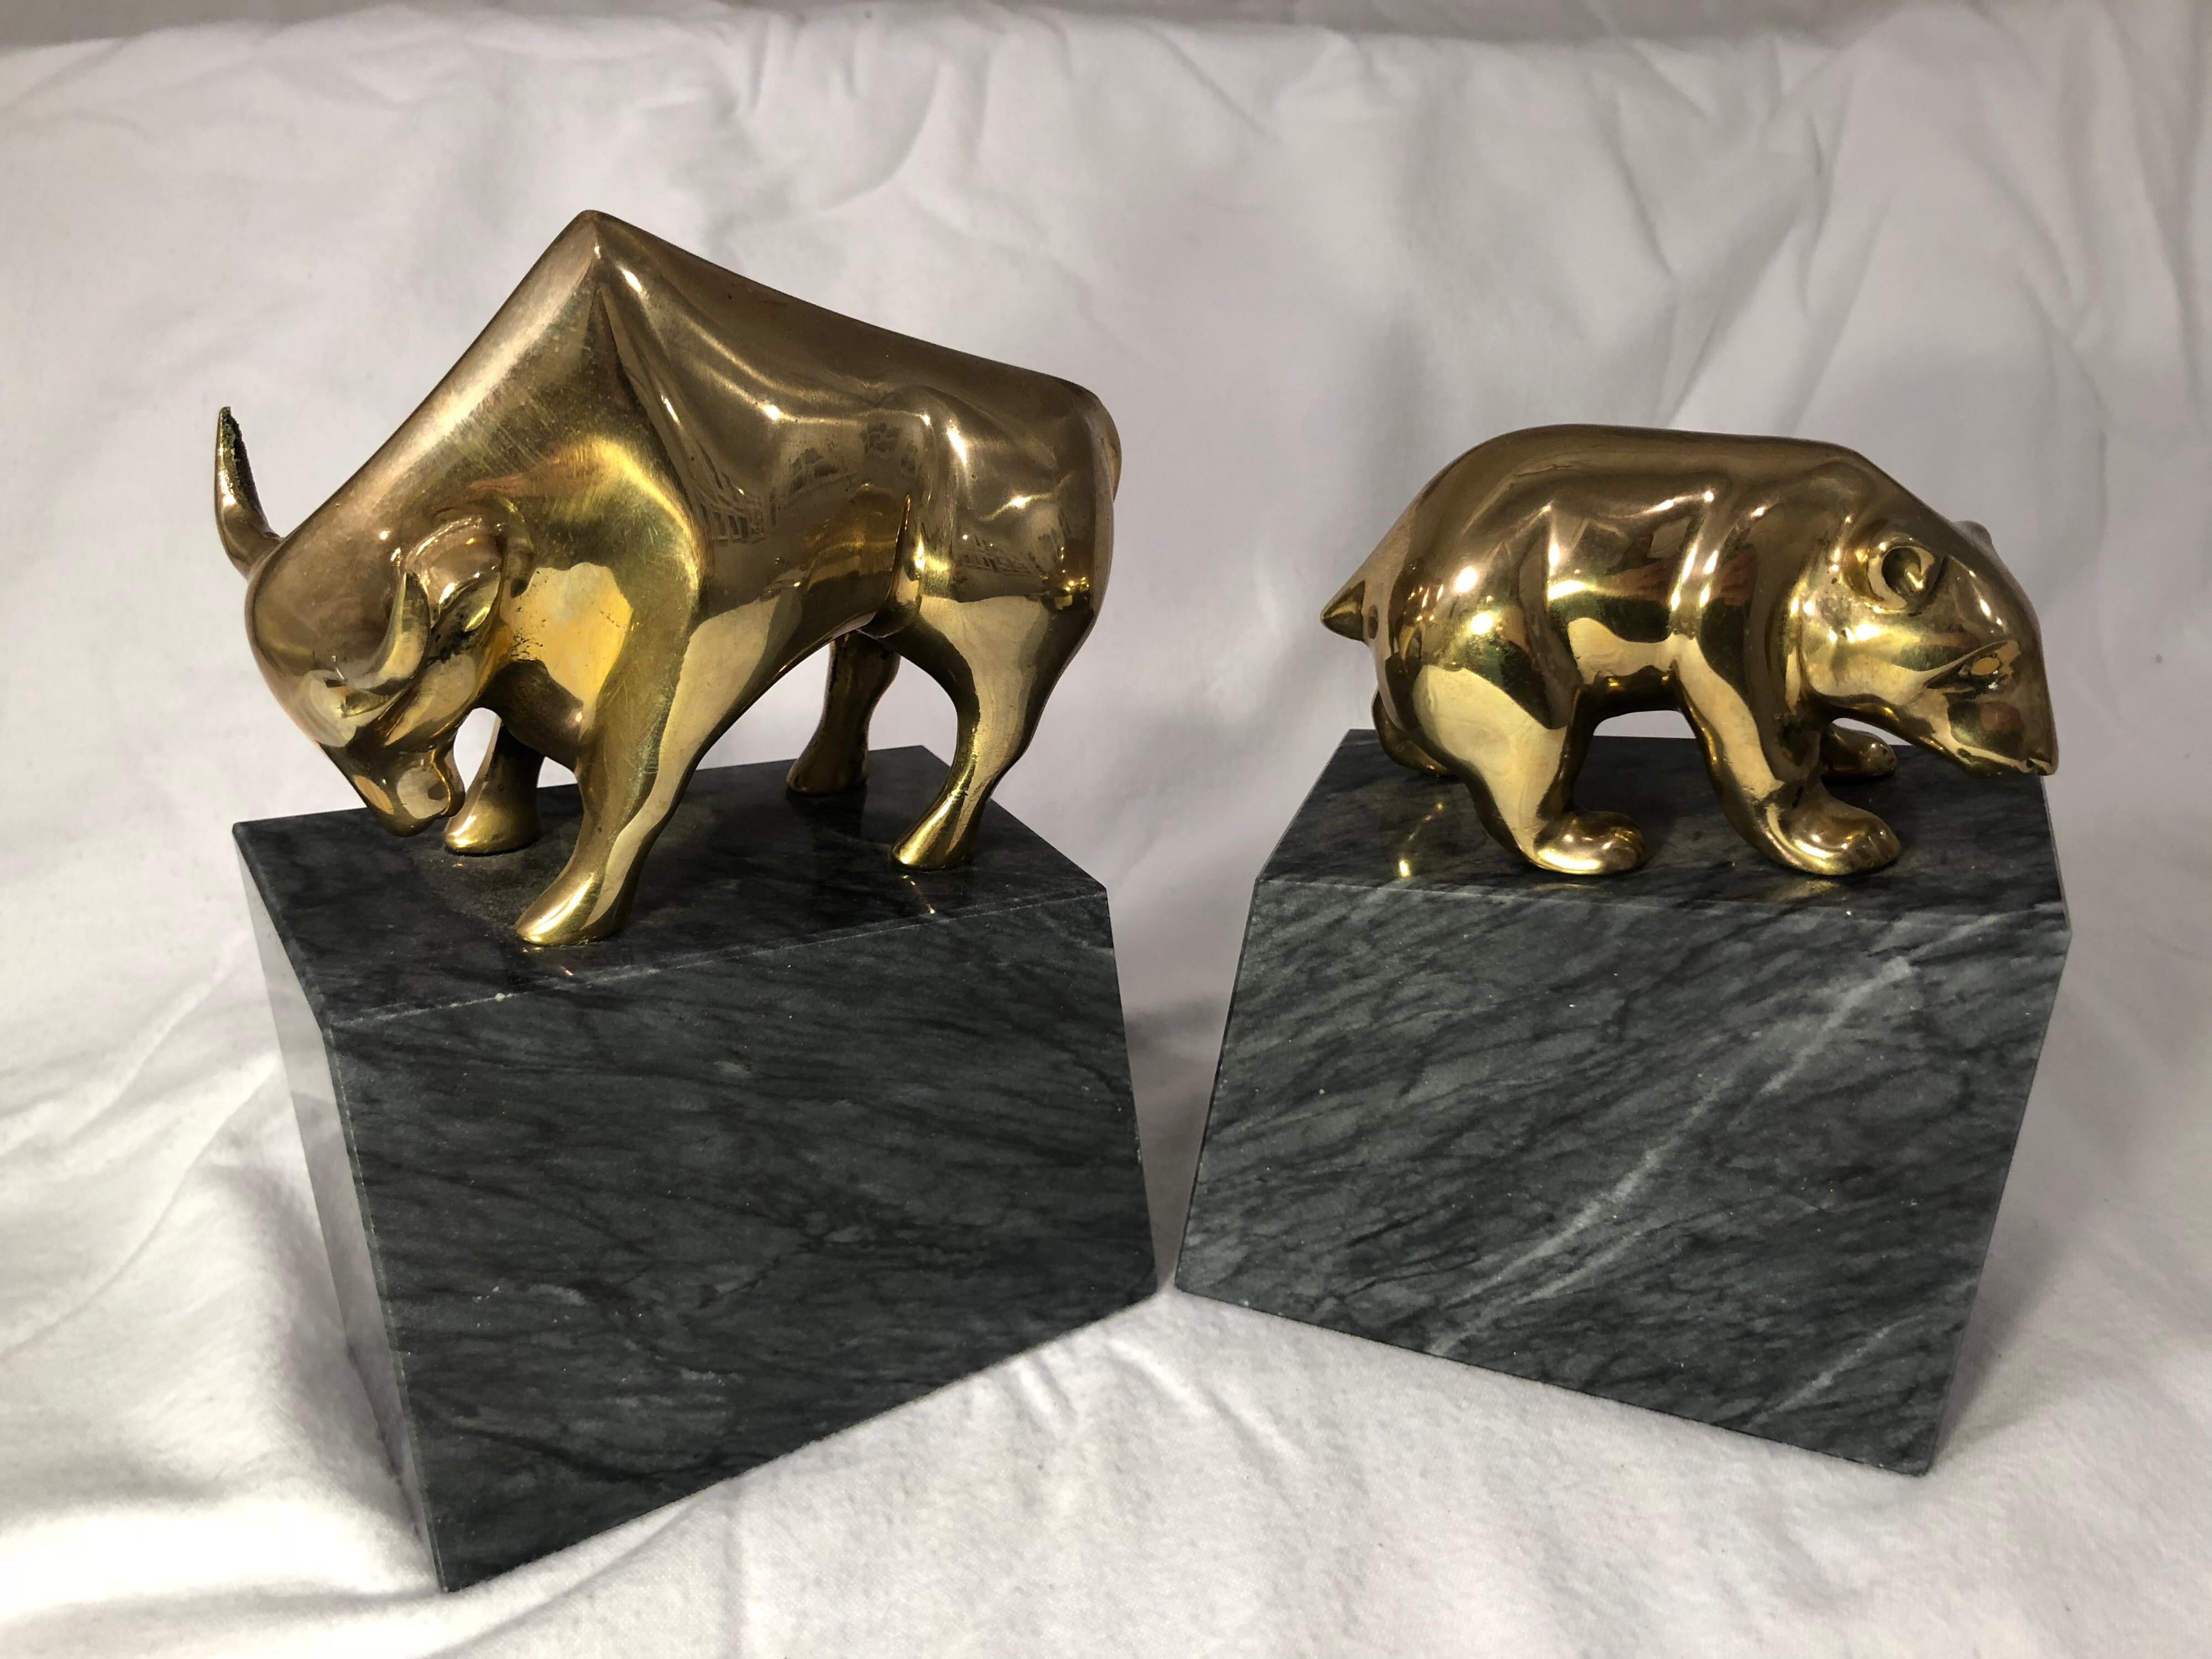 Mid-Century Modern bear and bull market bookends . Perfect gift for that wall street worker or trader on the stock market floor. Each is a cast brass design on a solid black marble base with white veining.
These are the perfect decor for a